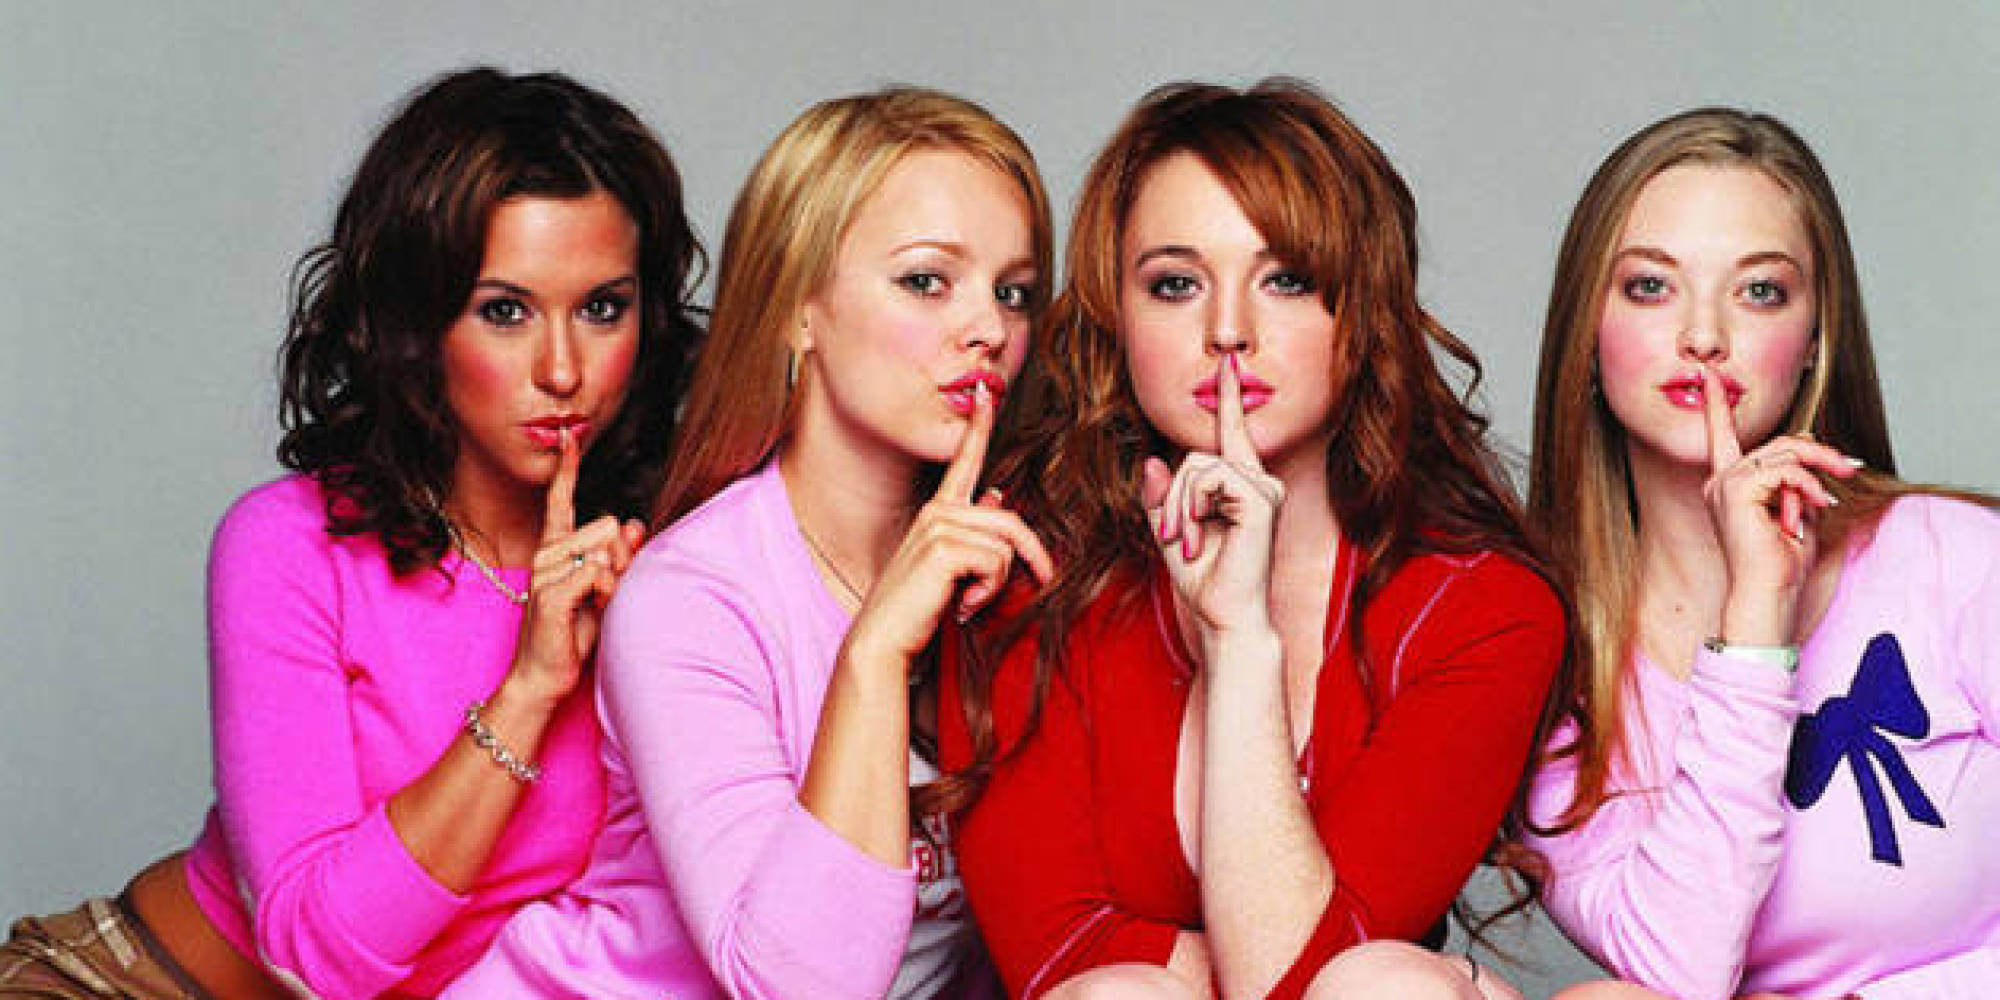 10 Facts You Didn't Know About 'Mean Girls'